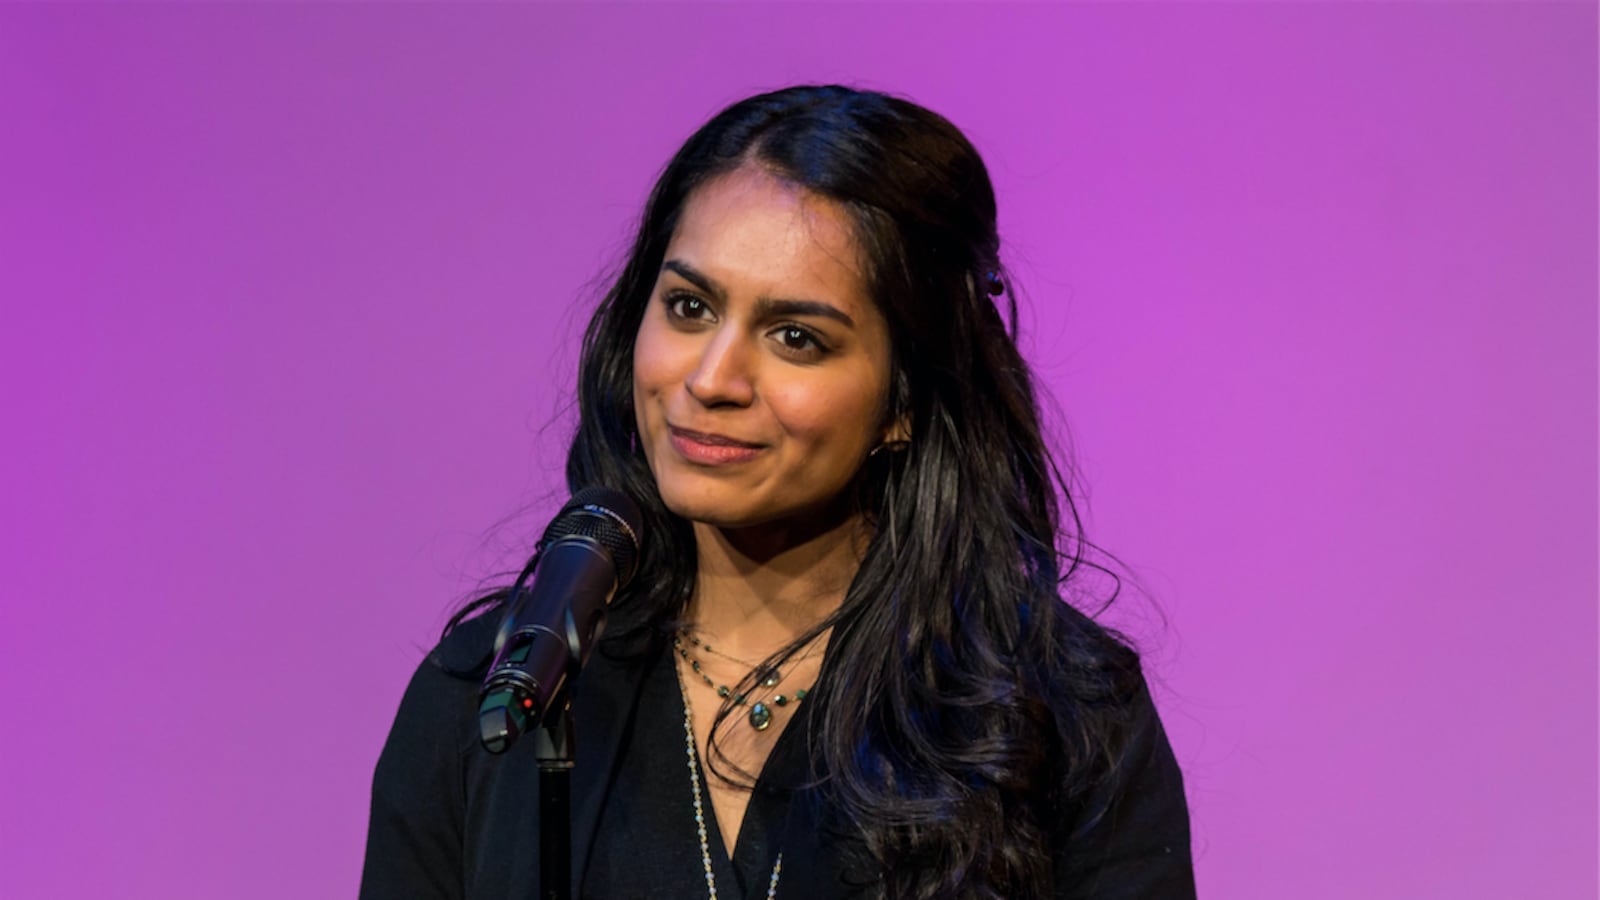 Anoopa Singh recounted why she became a chemistry teacher at an event sponsored by The Story Collider and Math for America.